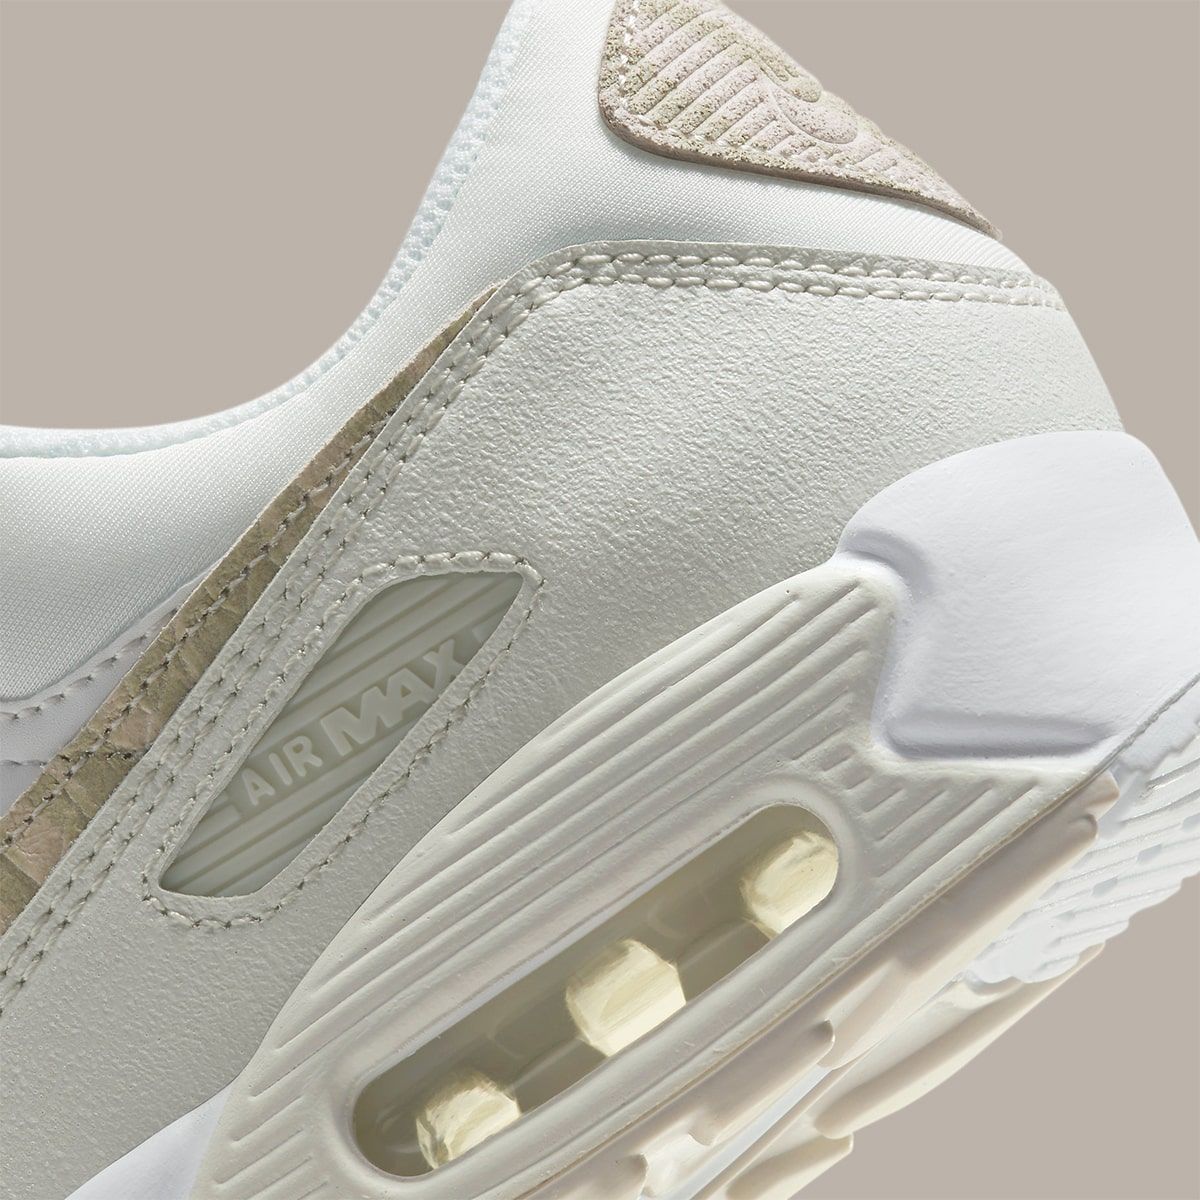 New Snakeskin Nike Air Max 90 Exudes Elegance | HOUSE OF HEAT